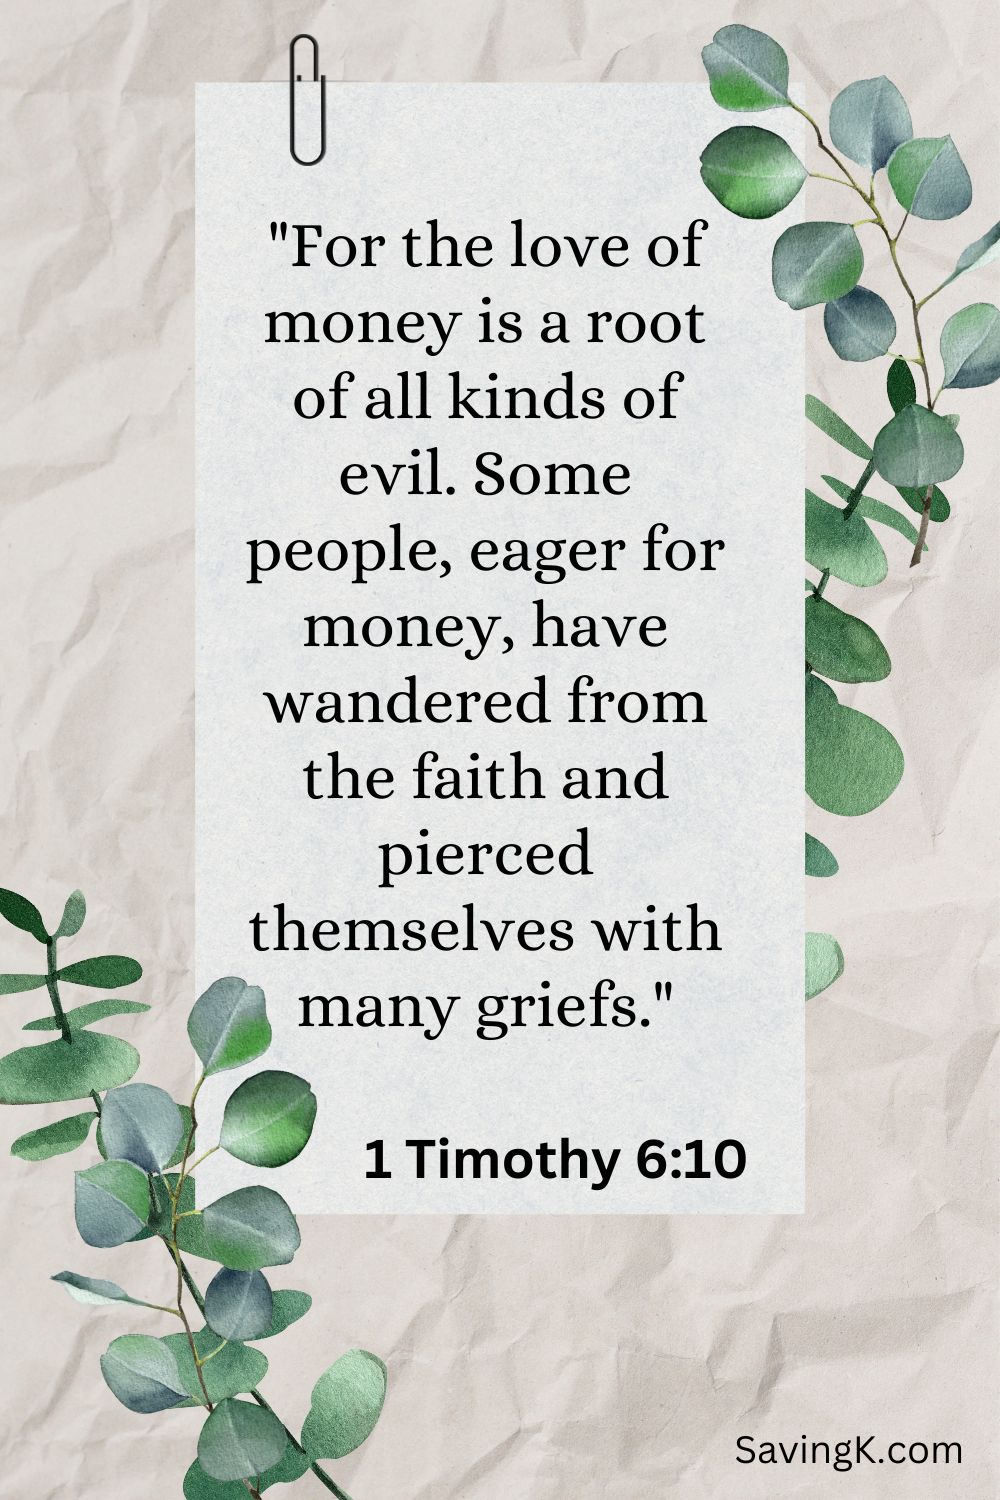 the love of money is a root of all kinds of evil